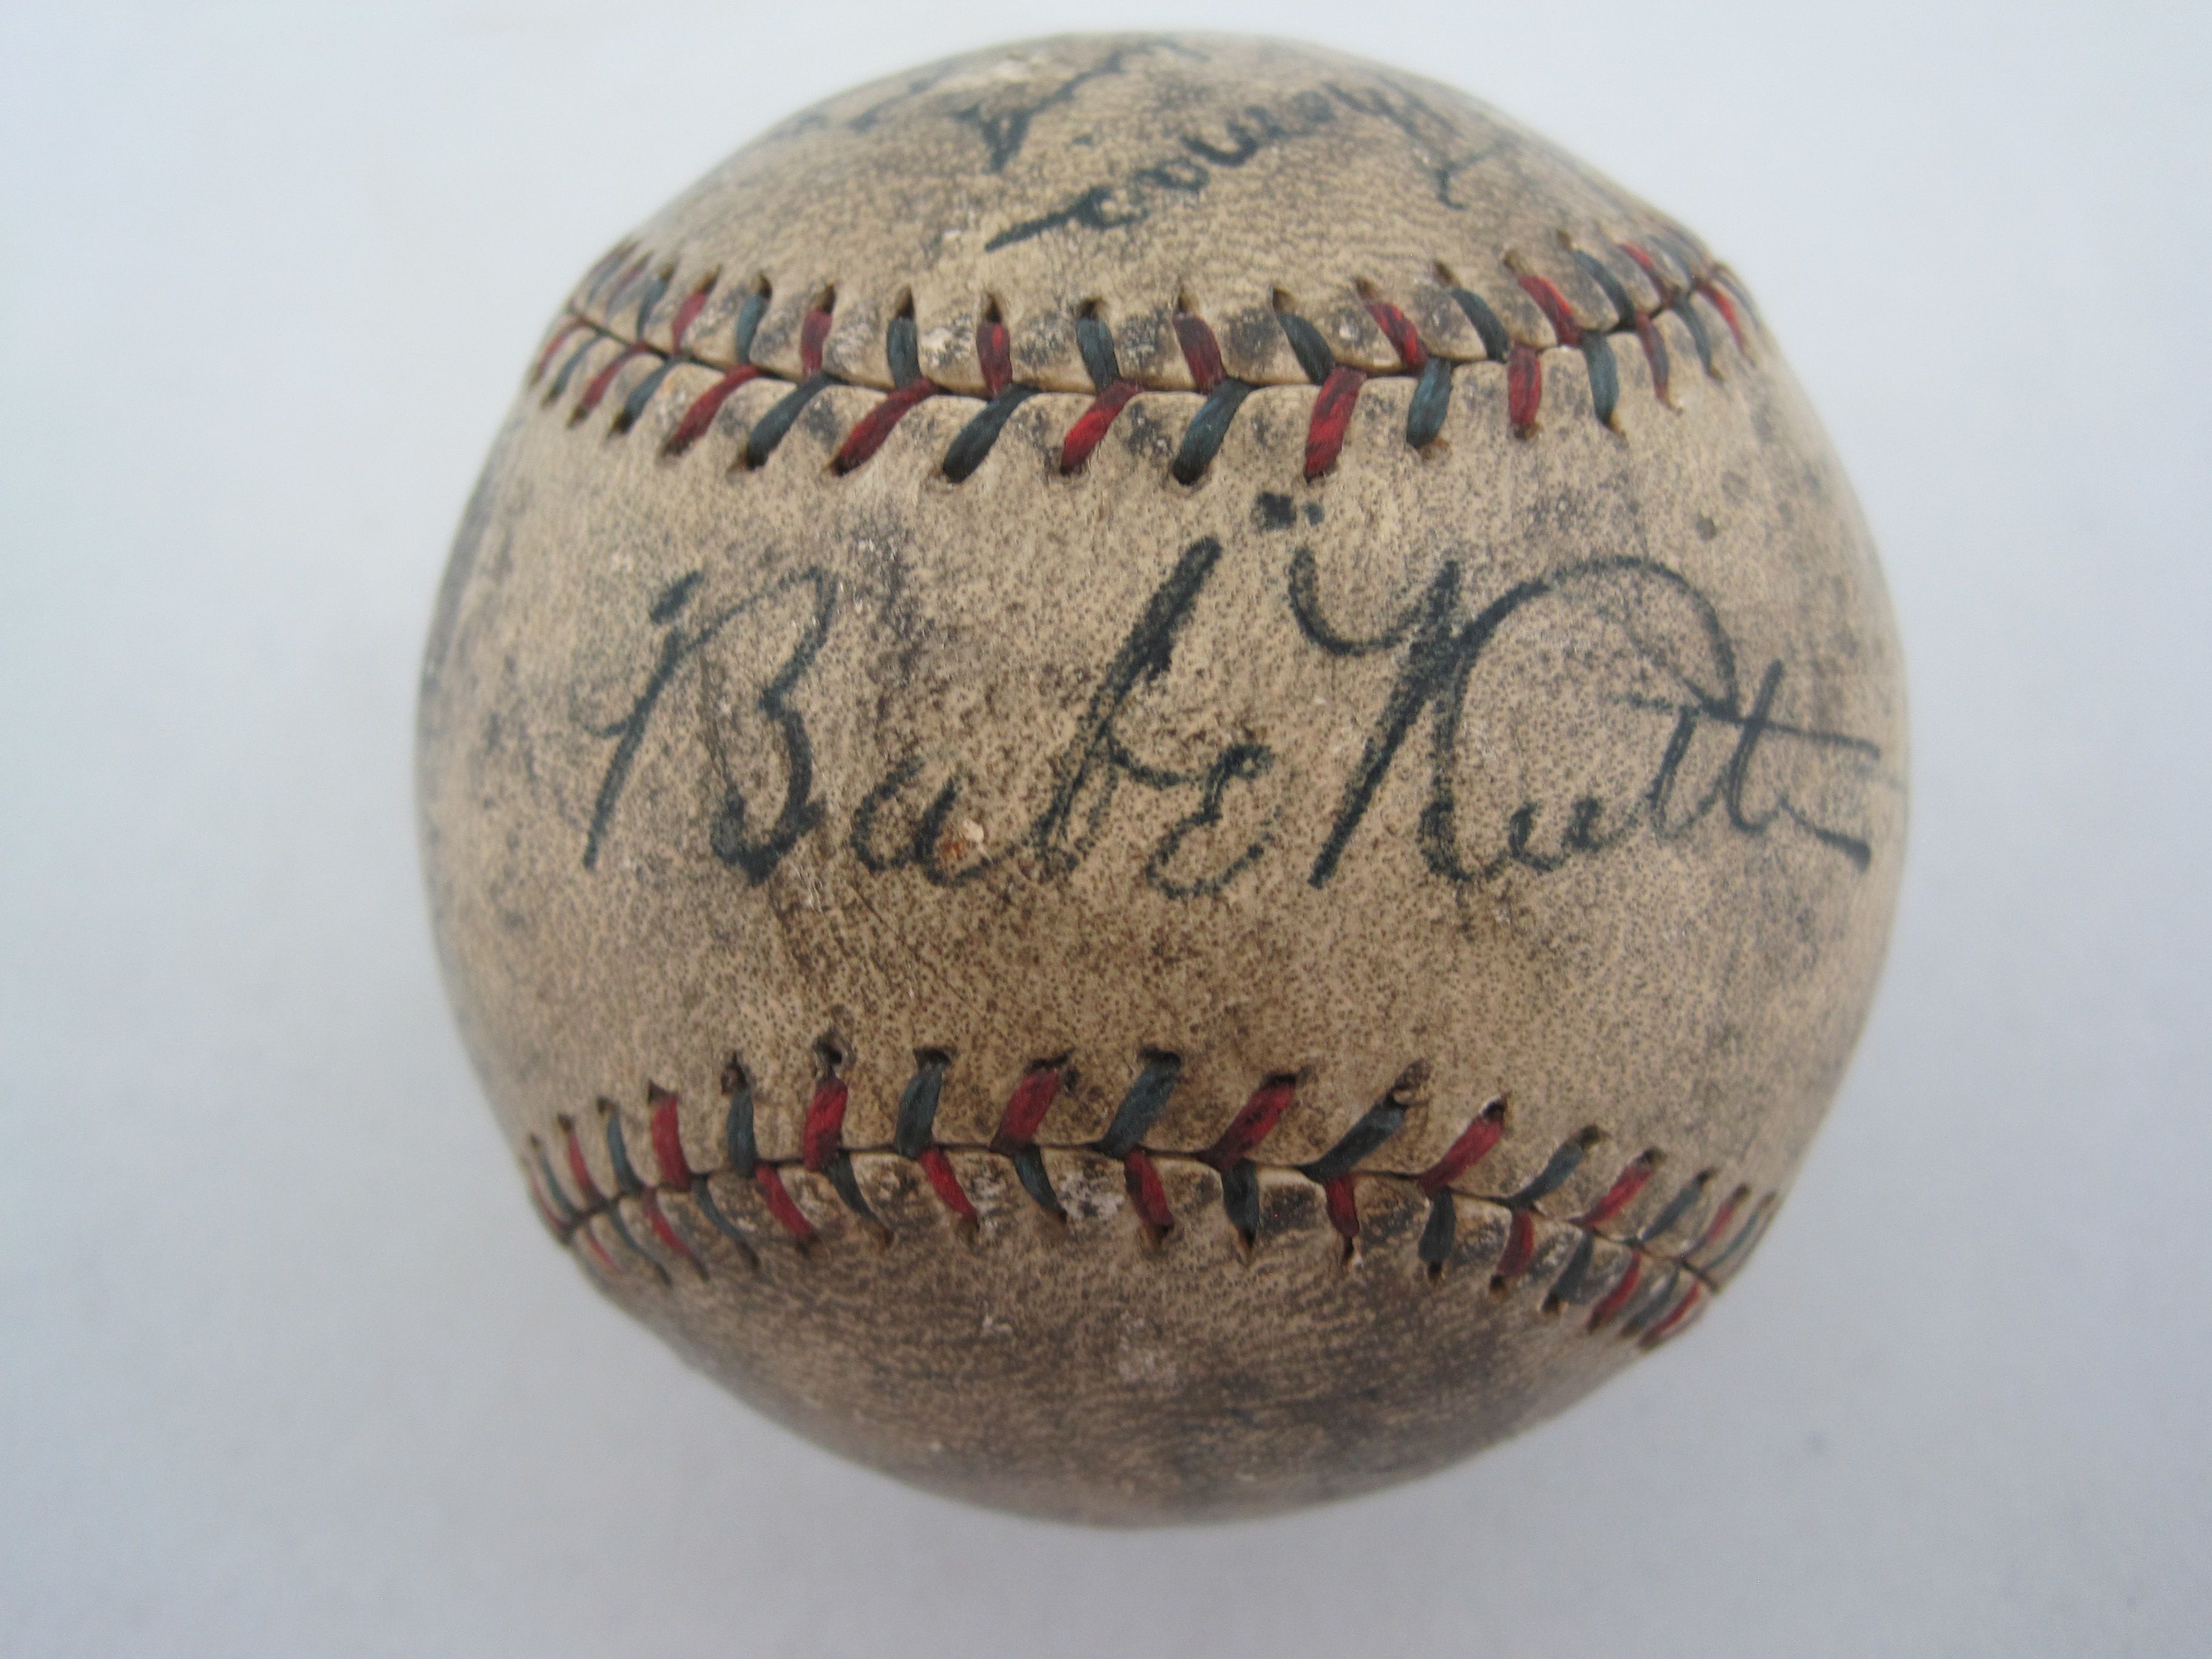 A rare baseball signed by Babe Ruth and other members of the 1927